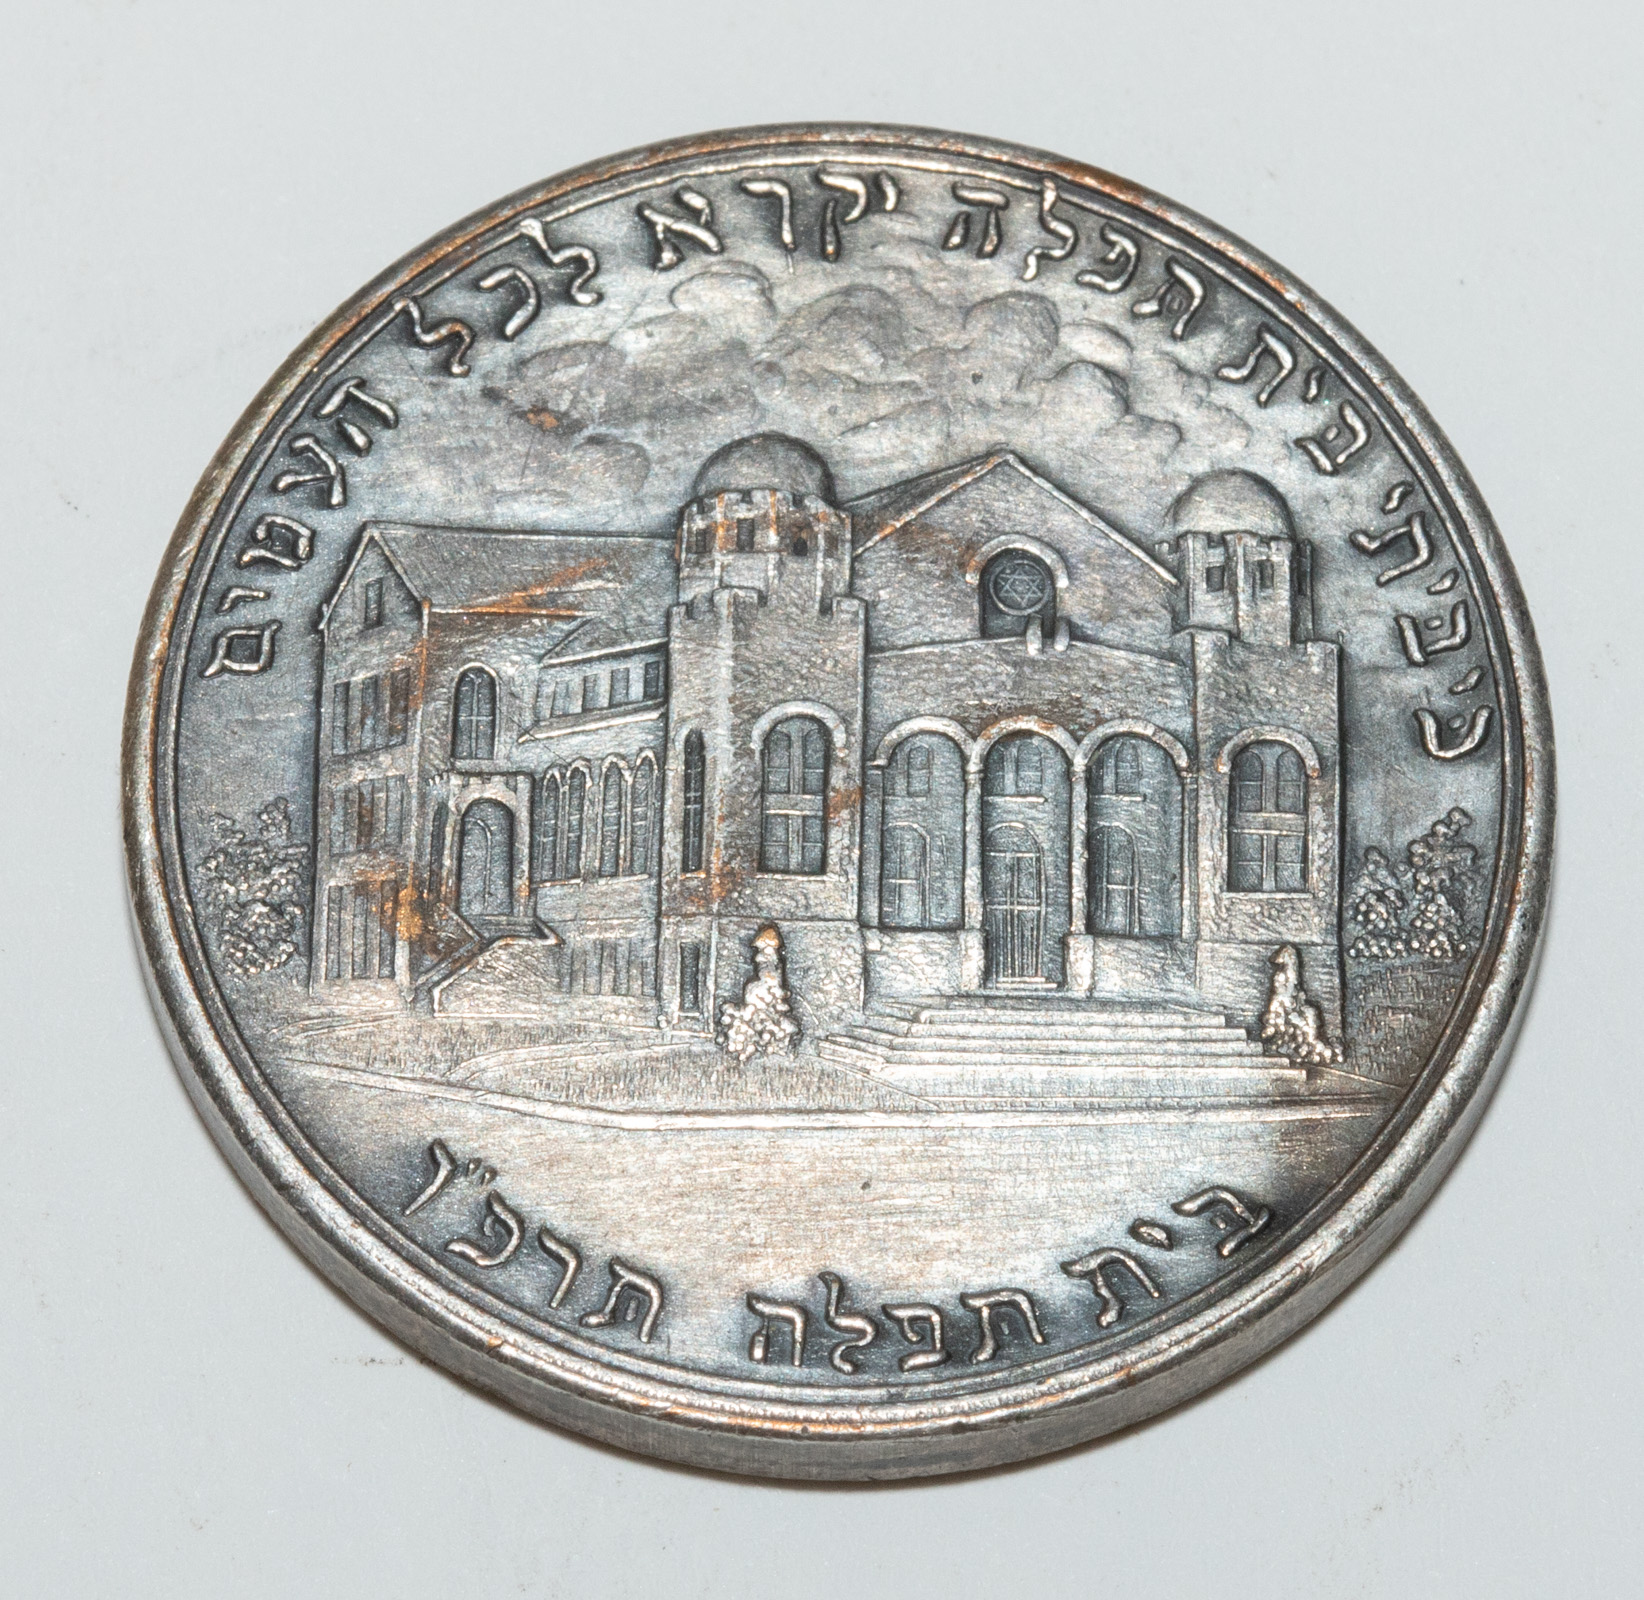 BETH TFILOH SILVER COIN/MEDAL Obverse